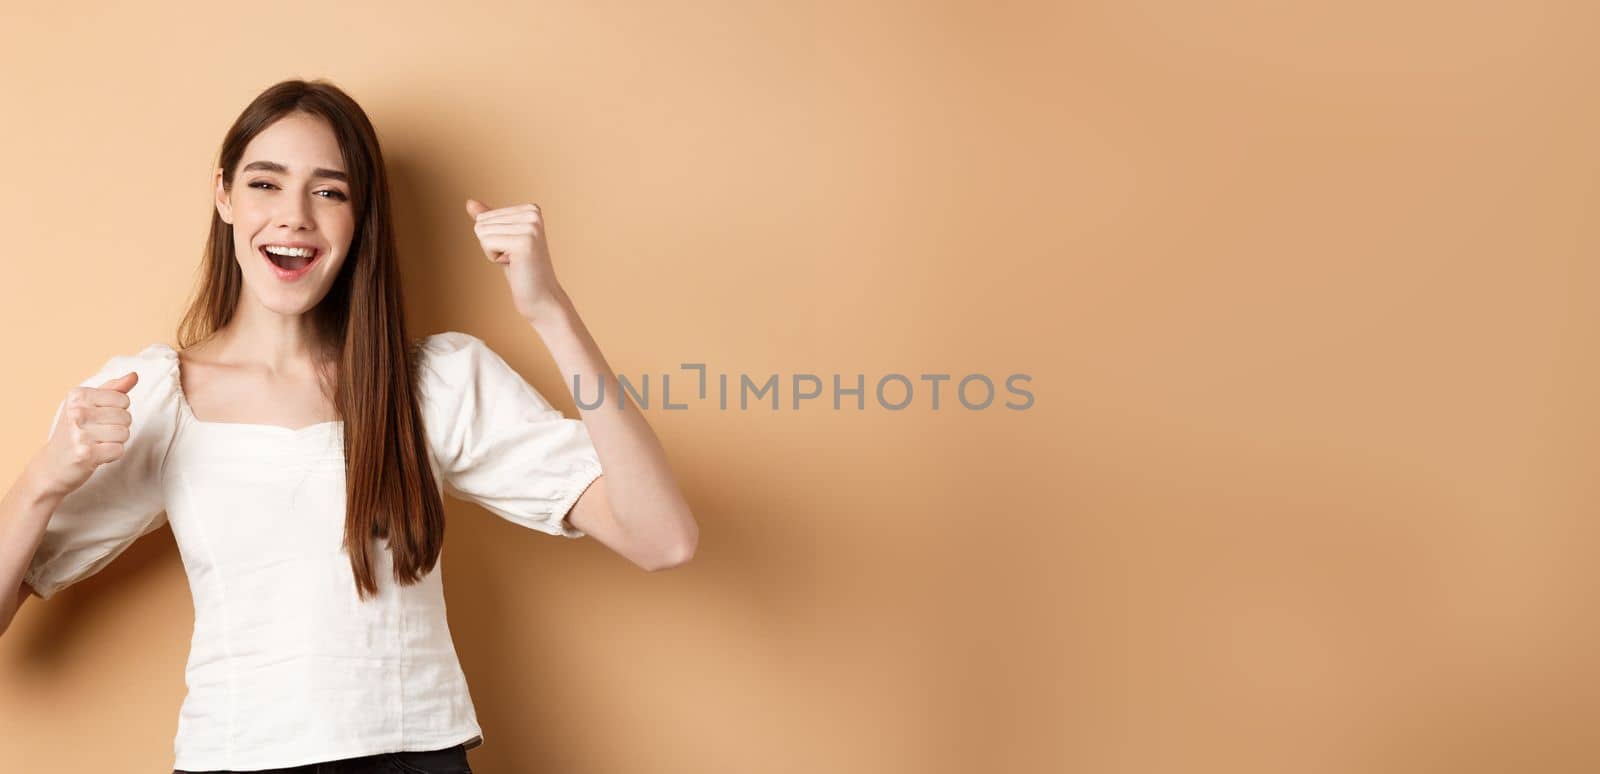 Girl getting motivation, making fist pumps and chanting yes, smiling happy, celebrating victory or cheering, standing on beige background.